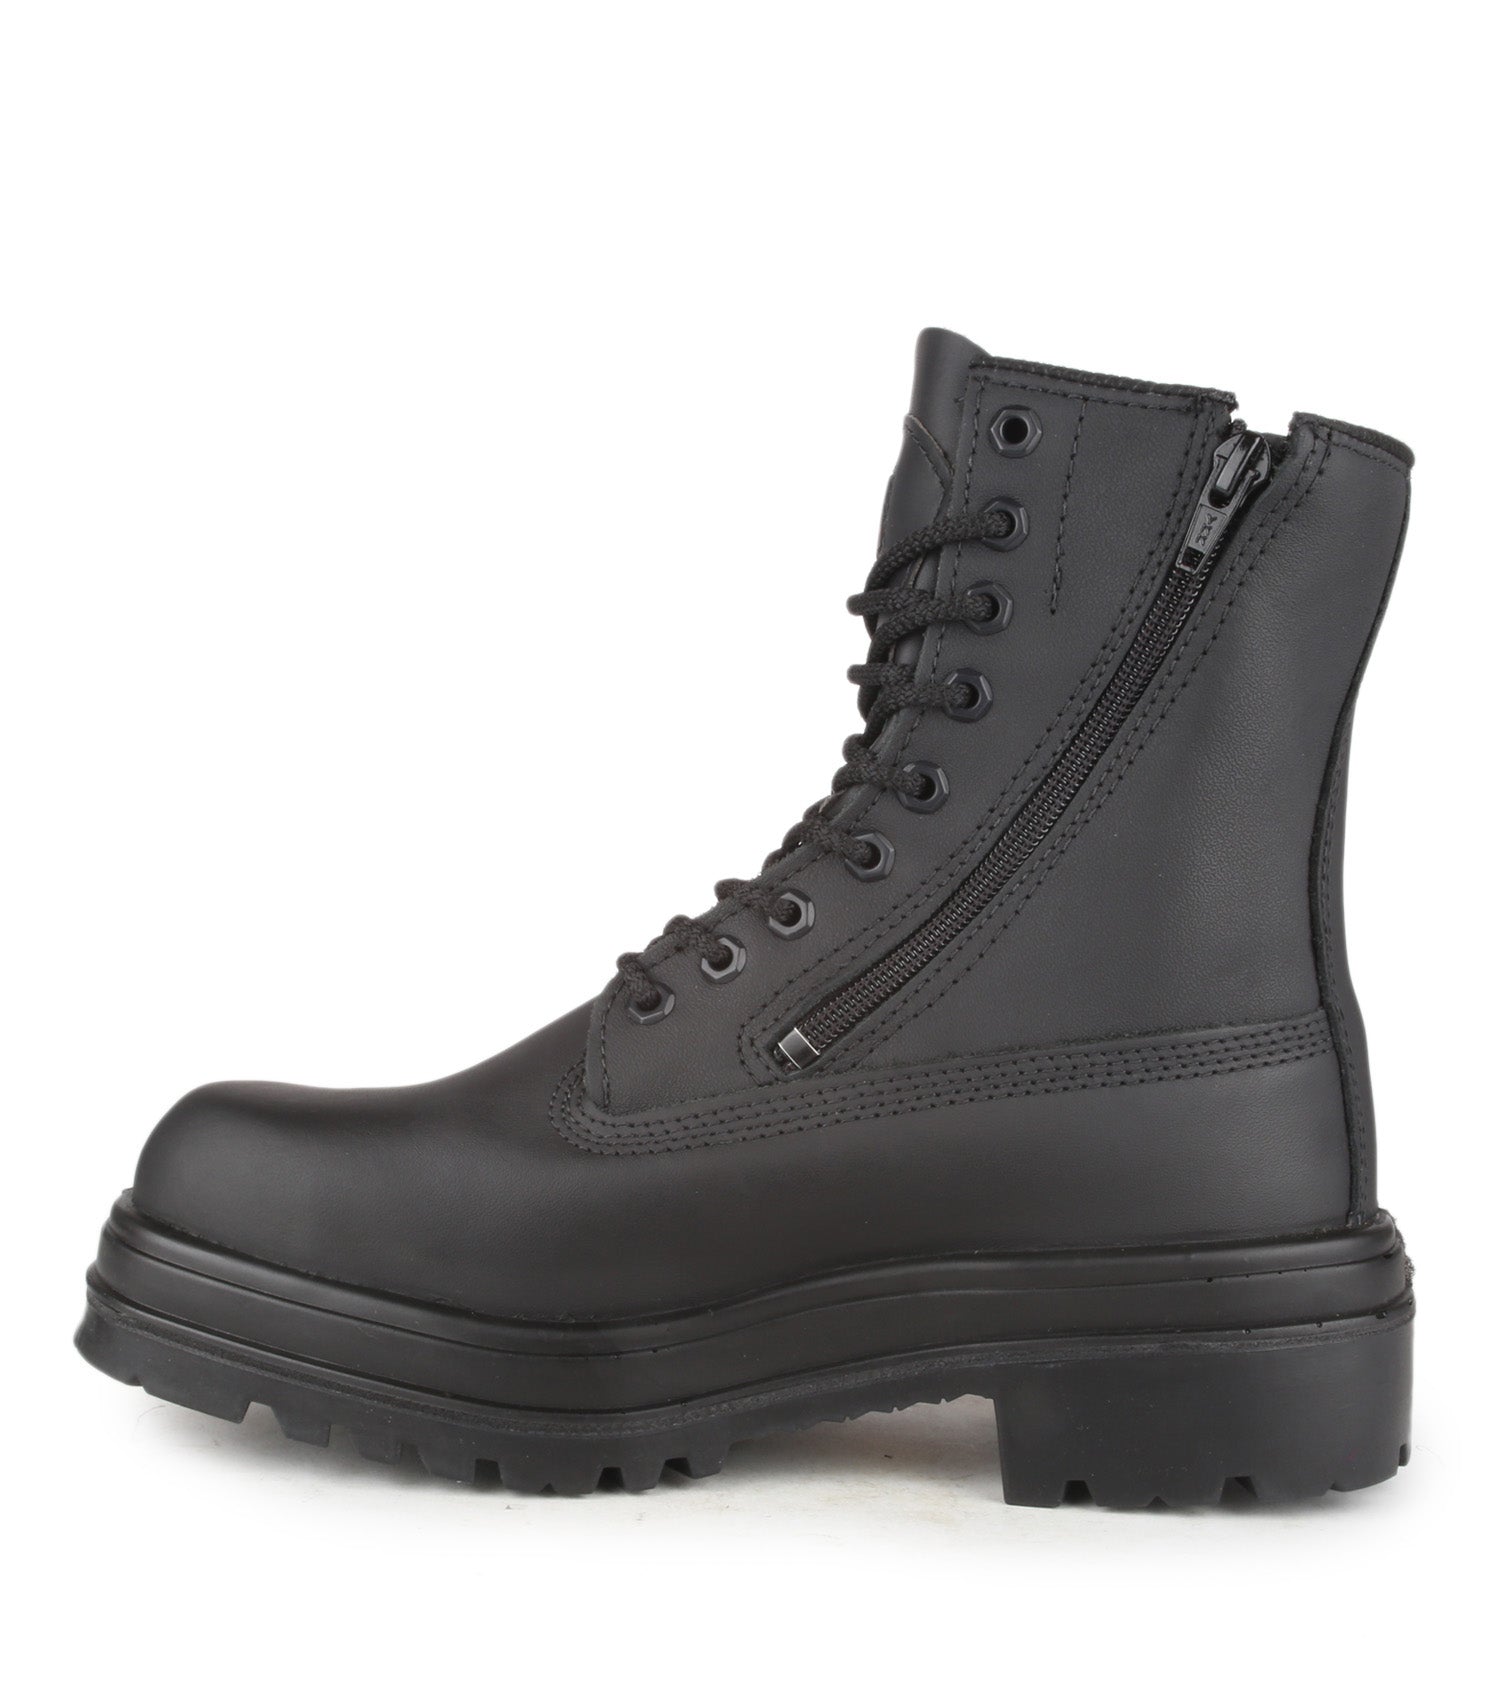 STC Hardrock Men's Safety Boot - Mucksters Supply Corp